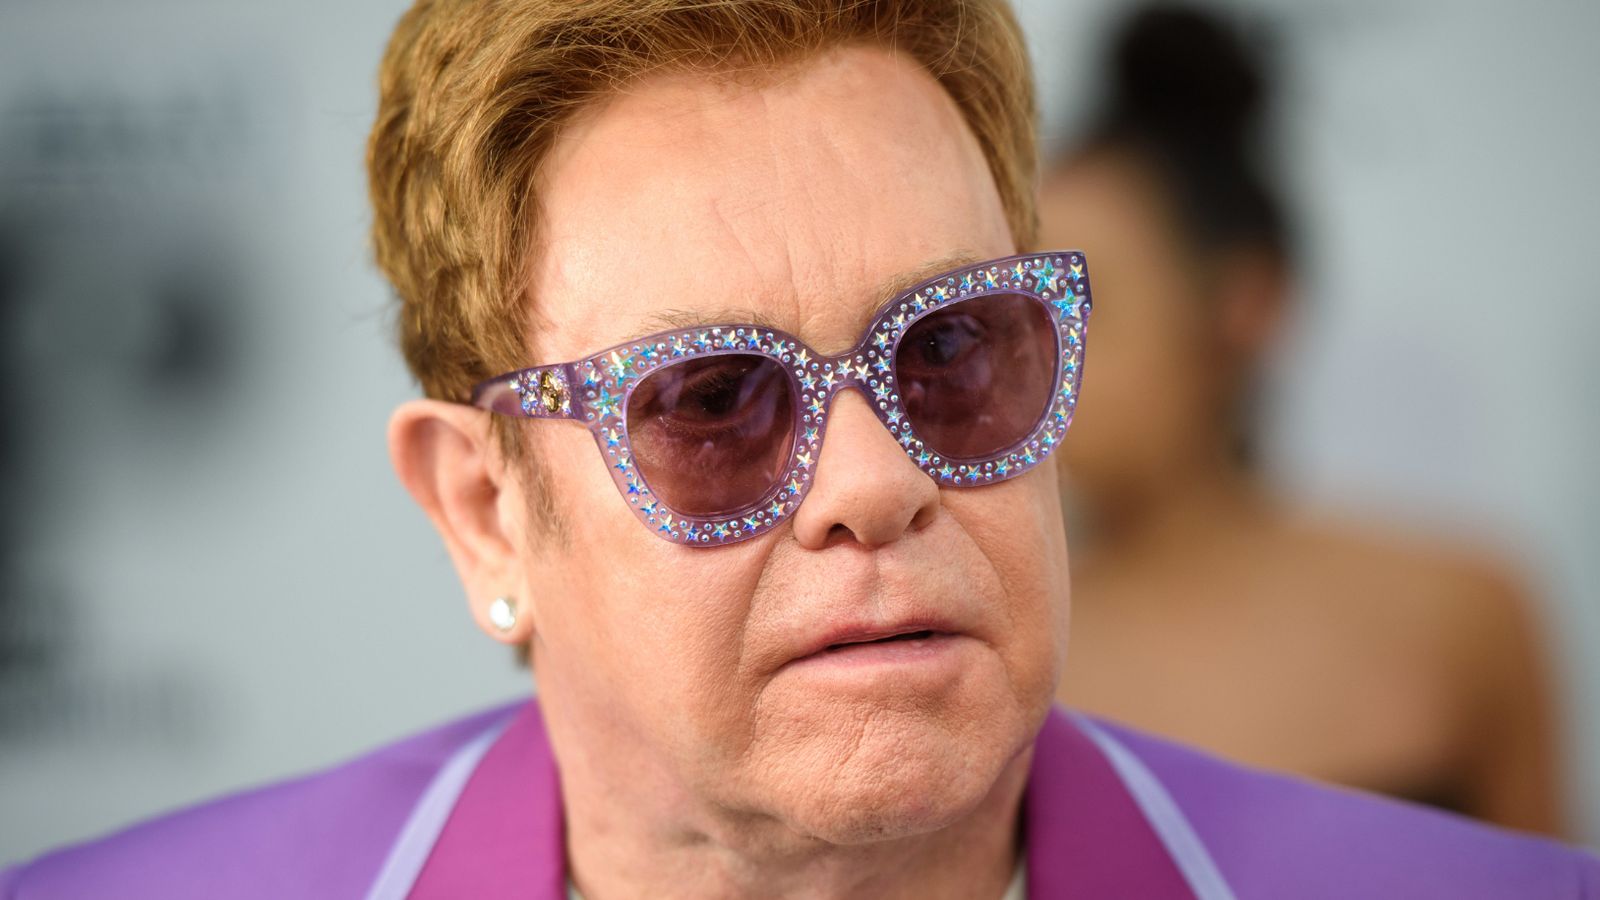 COVID-19: Sir Elton John forced to delay shows after testing positive for coronavirus